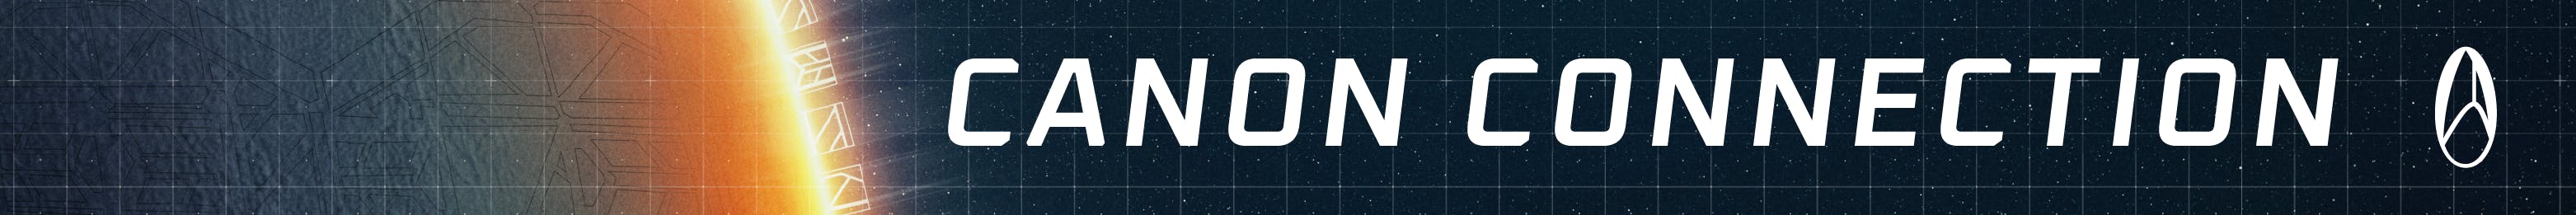 Star Trek: Discovery Season 5 Section Banner - Canon Connections